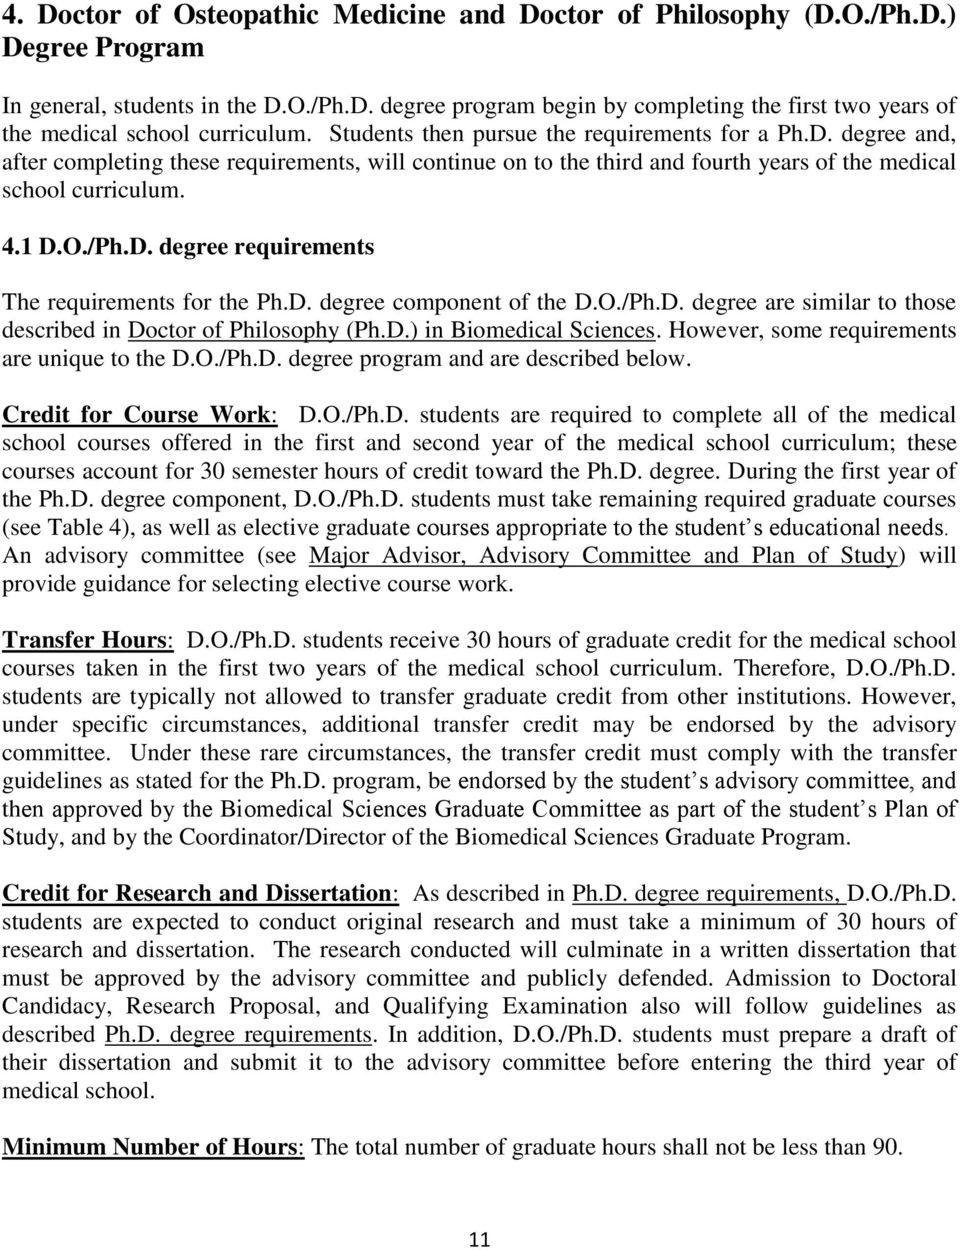 D. degree component of the D.O./Ph.D. degree are similar to those described in Doctor of Philosophy (Ph.D.) in Biomedical Sciences. However, some requirements are unique to the D.O./Ph.D. degree program and are described below.